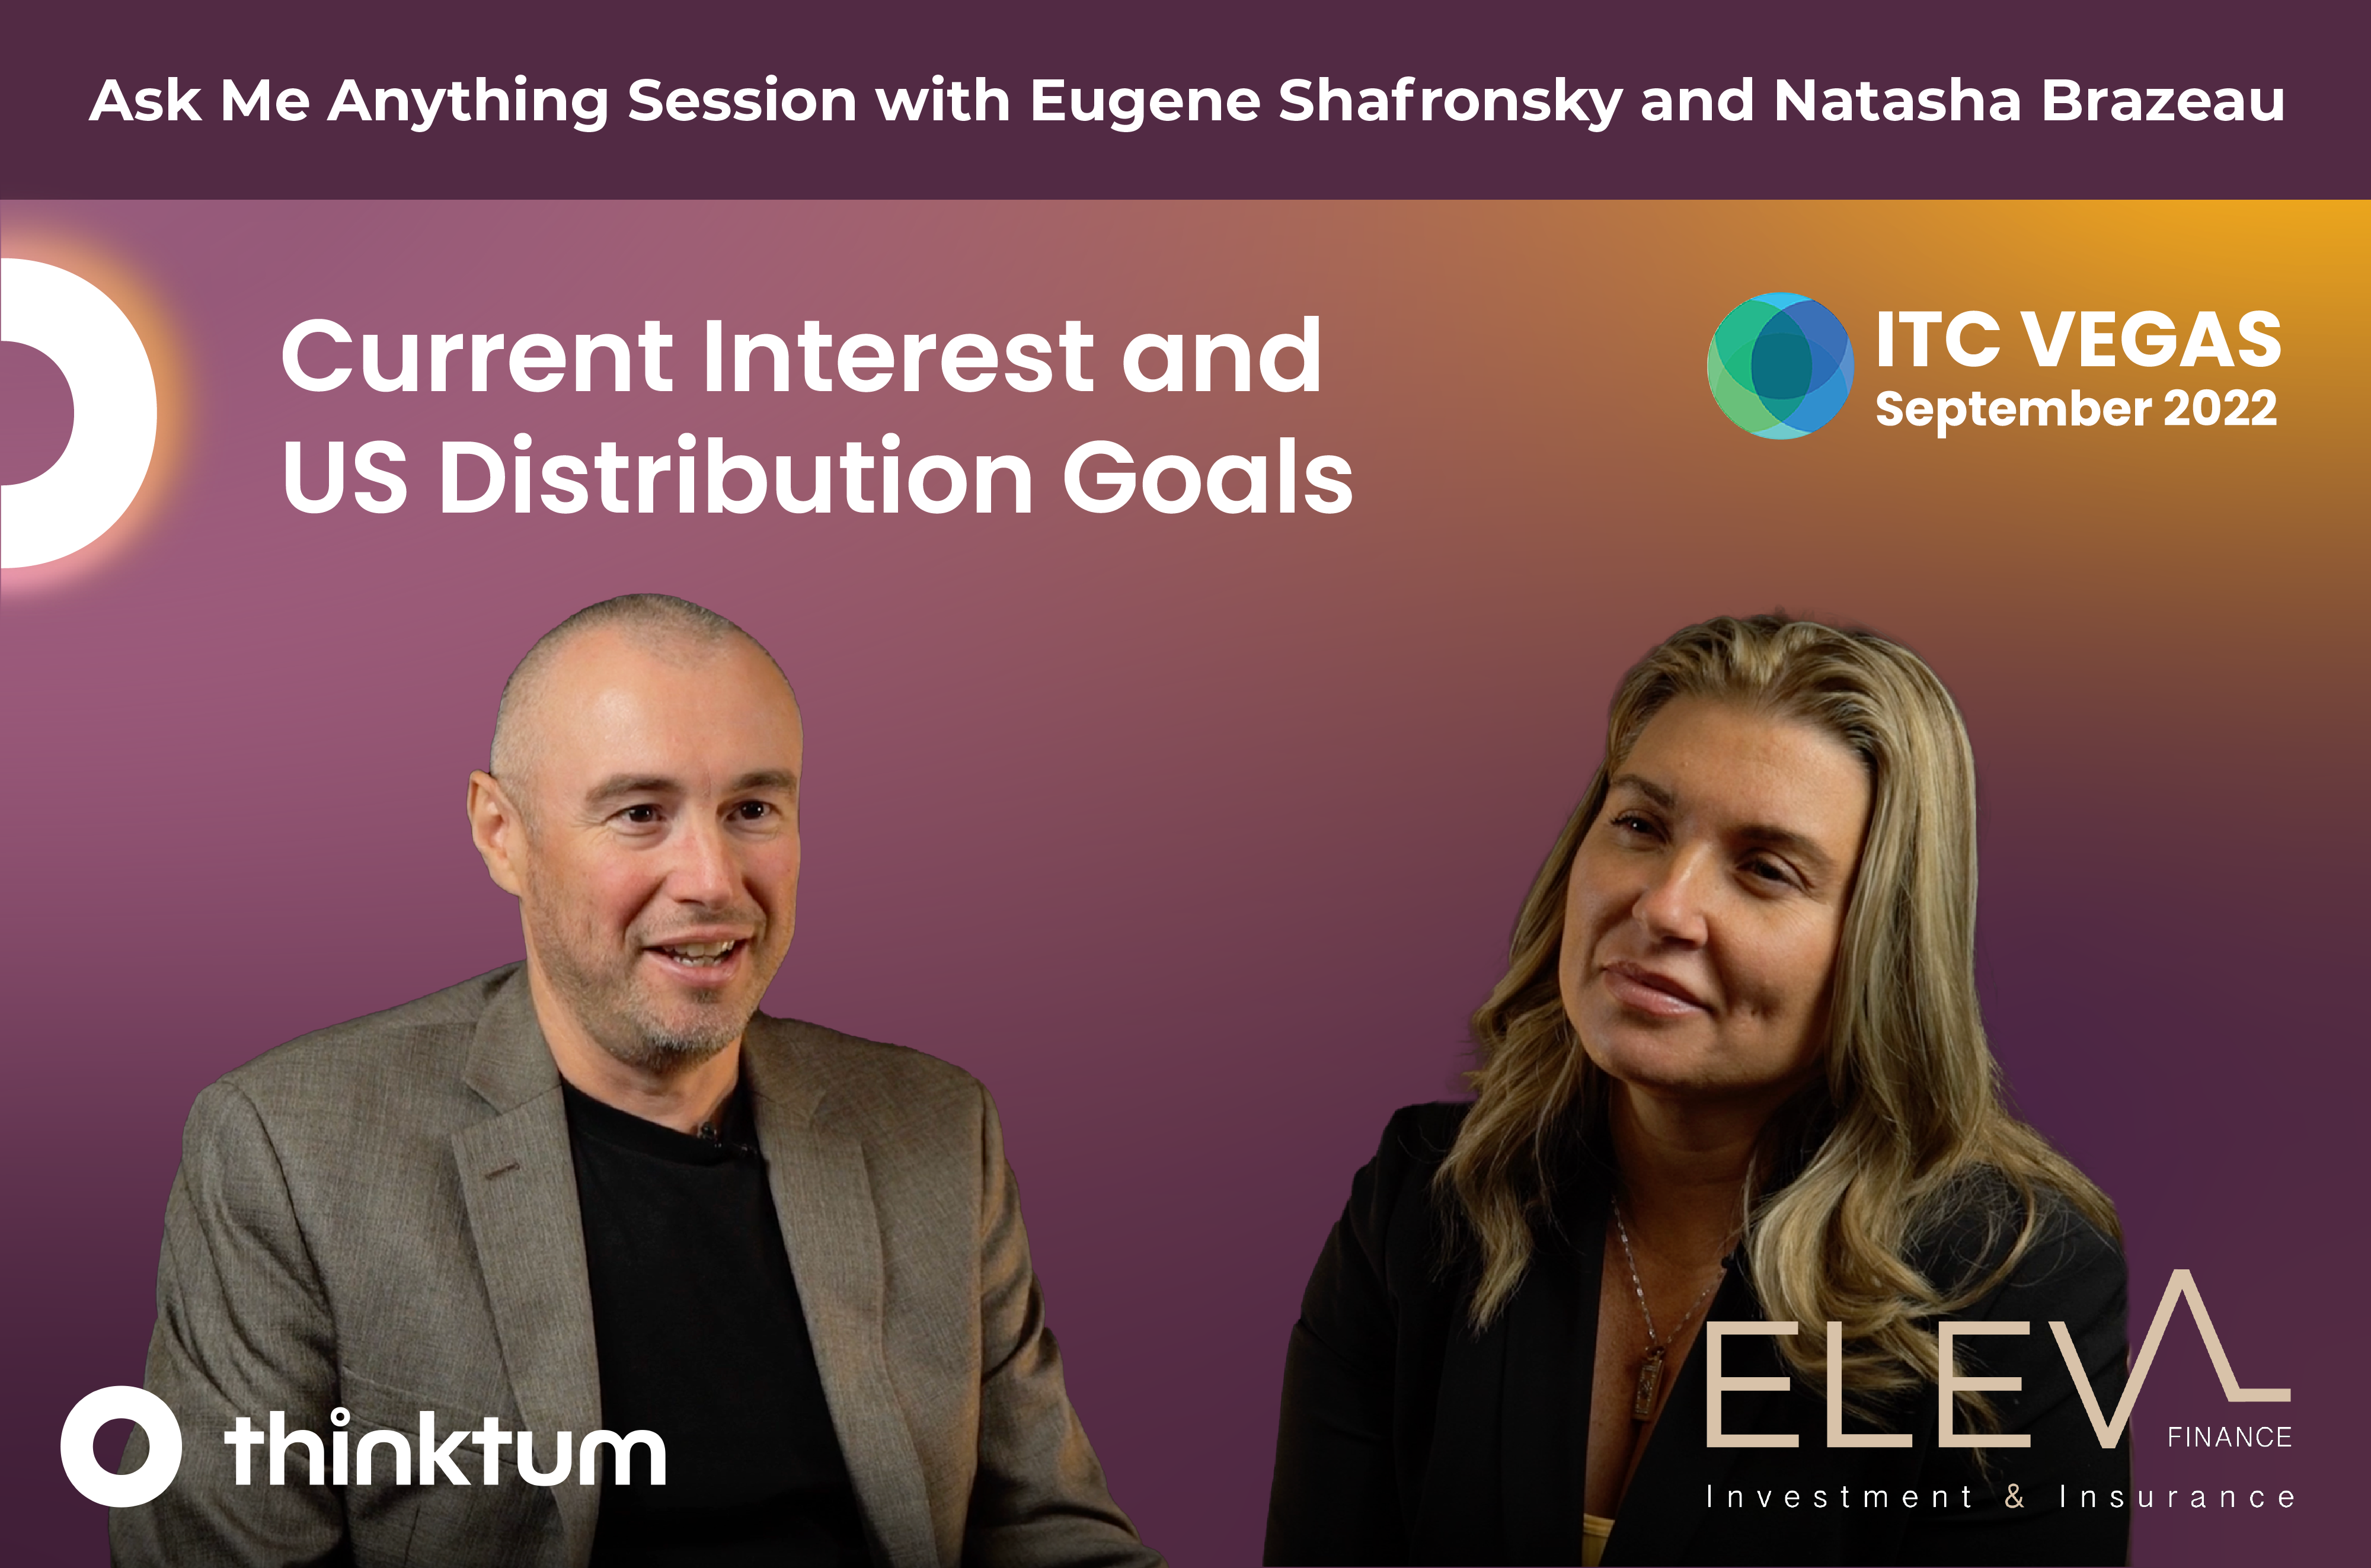 Ad for the Ask Me Anything session with thinktum's Eugene Shafronsky and Eleva Finance's CEO Natasha Brazeau titled Current Interest and US Distribution Goals and the ITC Vegas 2022 logo.